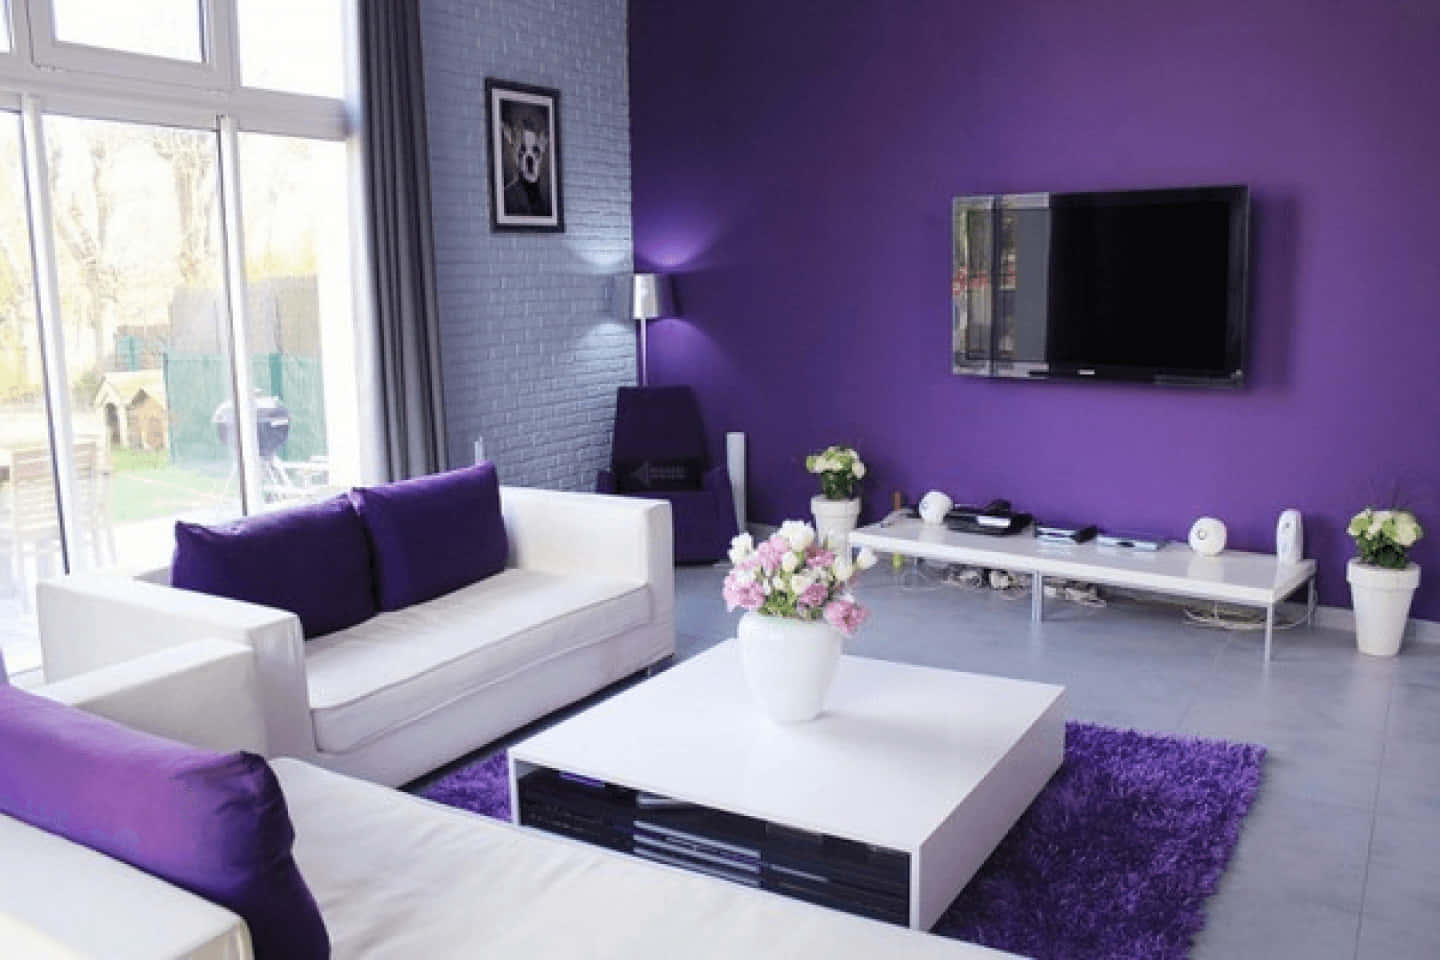 A modern purple color scheme adds an air of sophistication to any space. Wallpaper